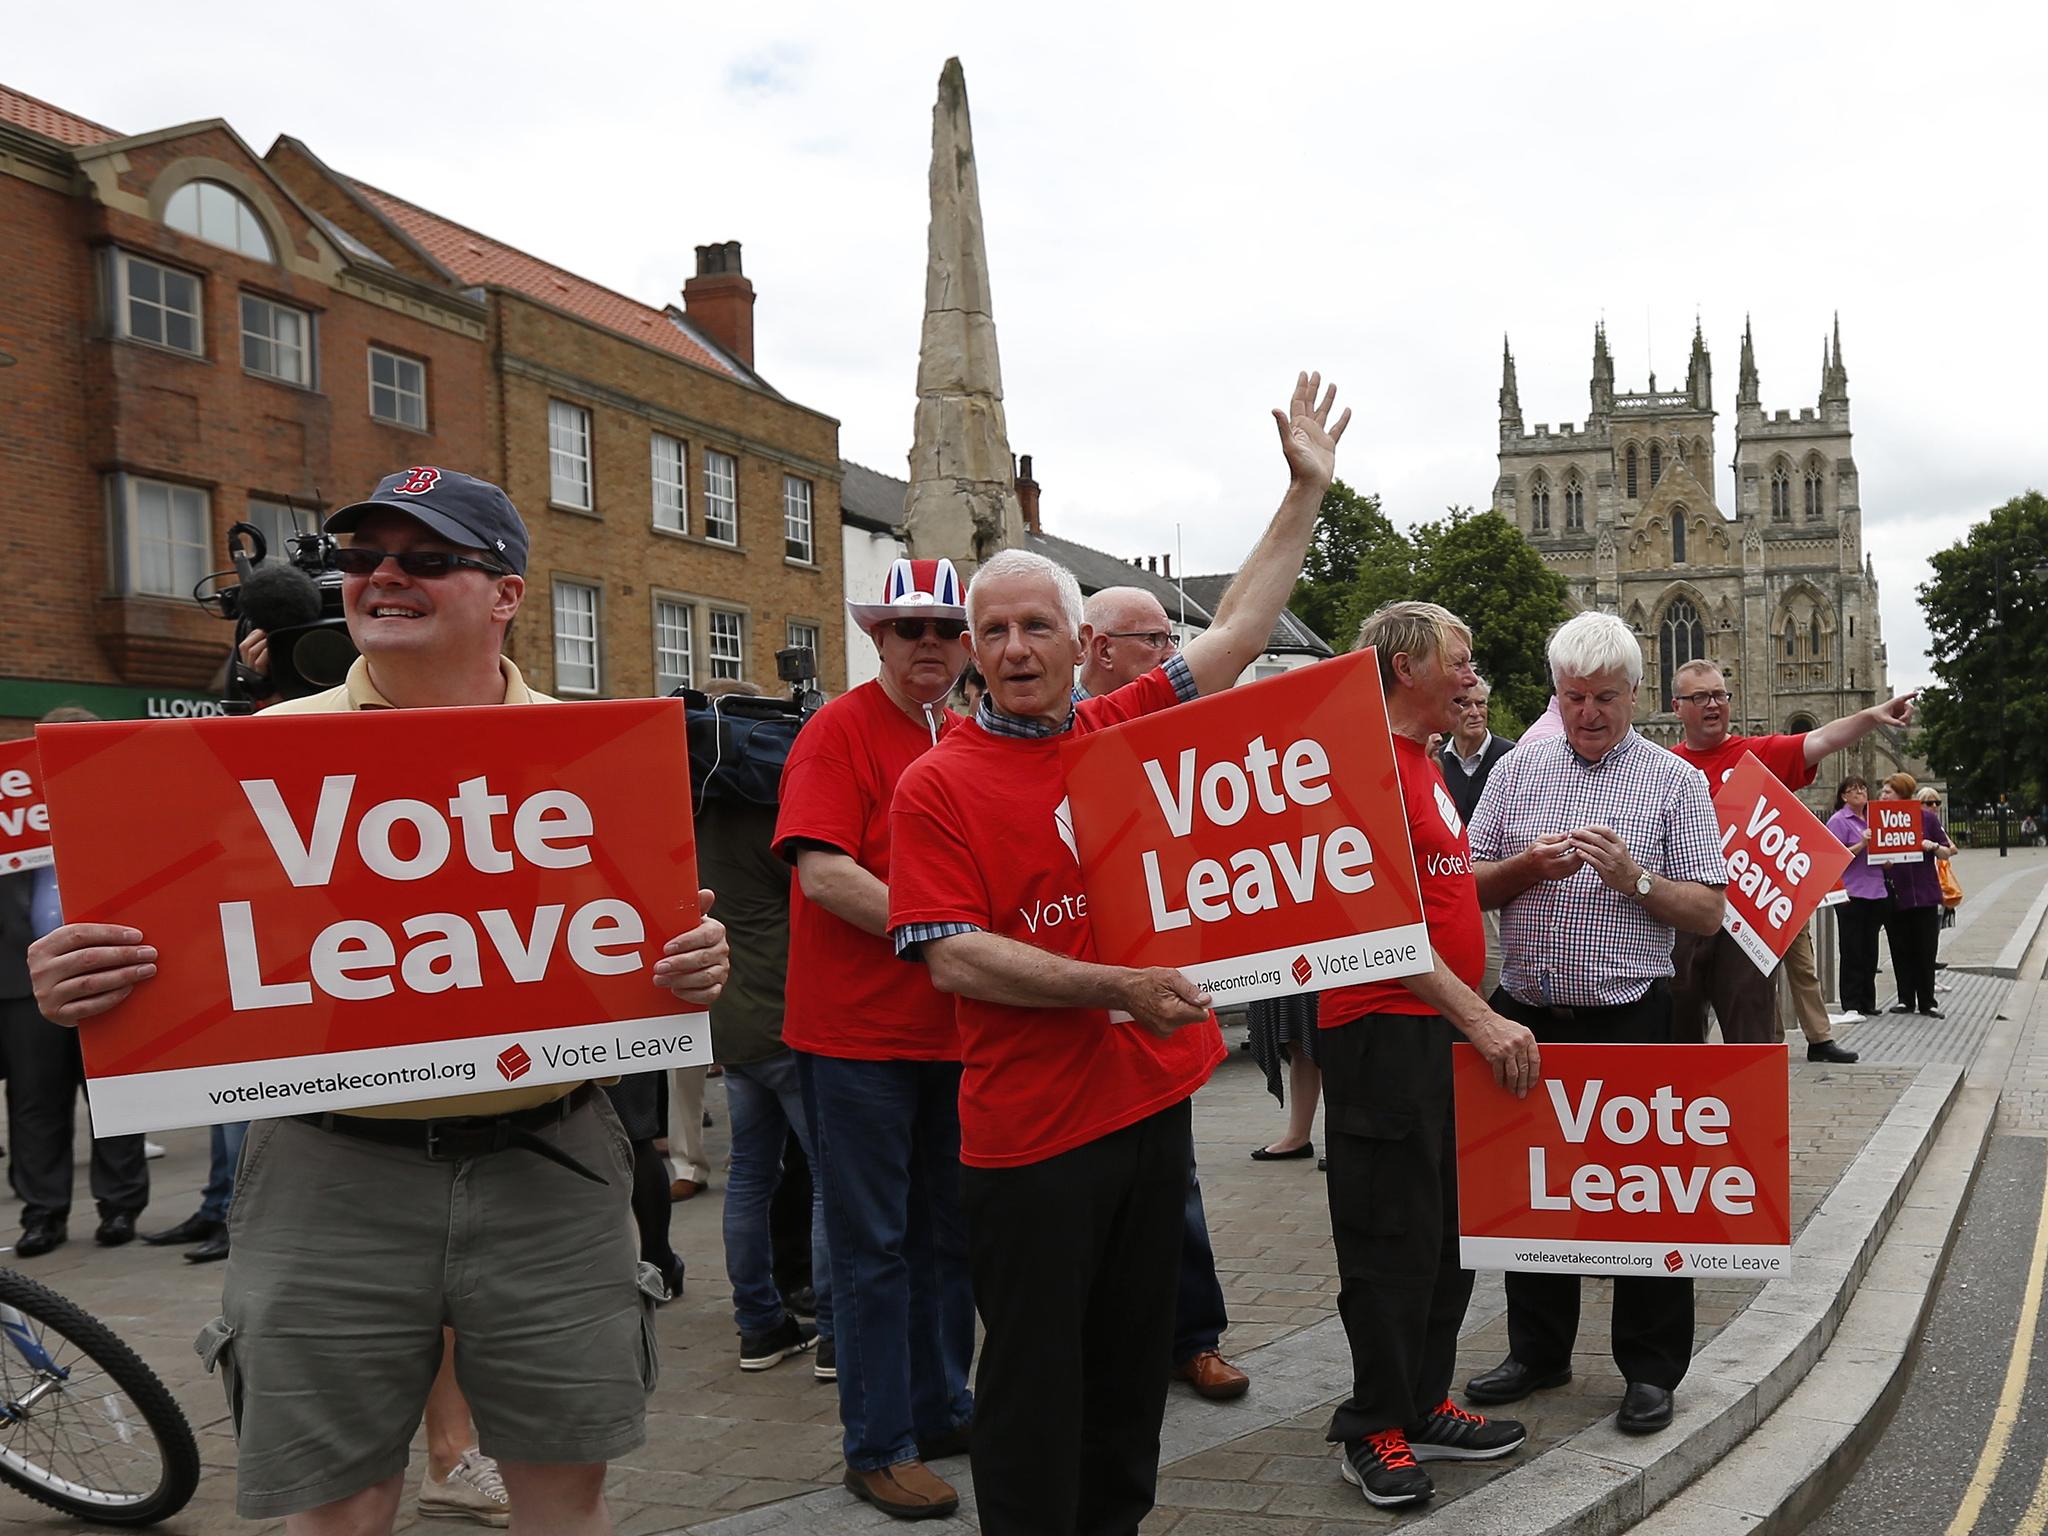 "There is little doubt that the Brexit vote was prompted in part by a sense that people felt abandoned by central government," the report said